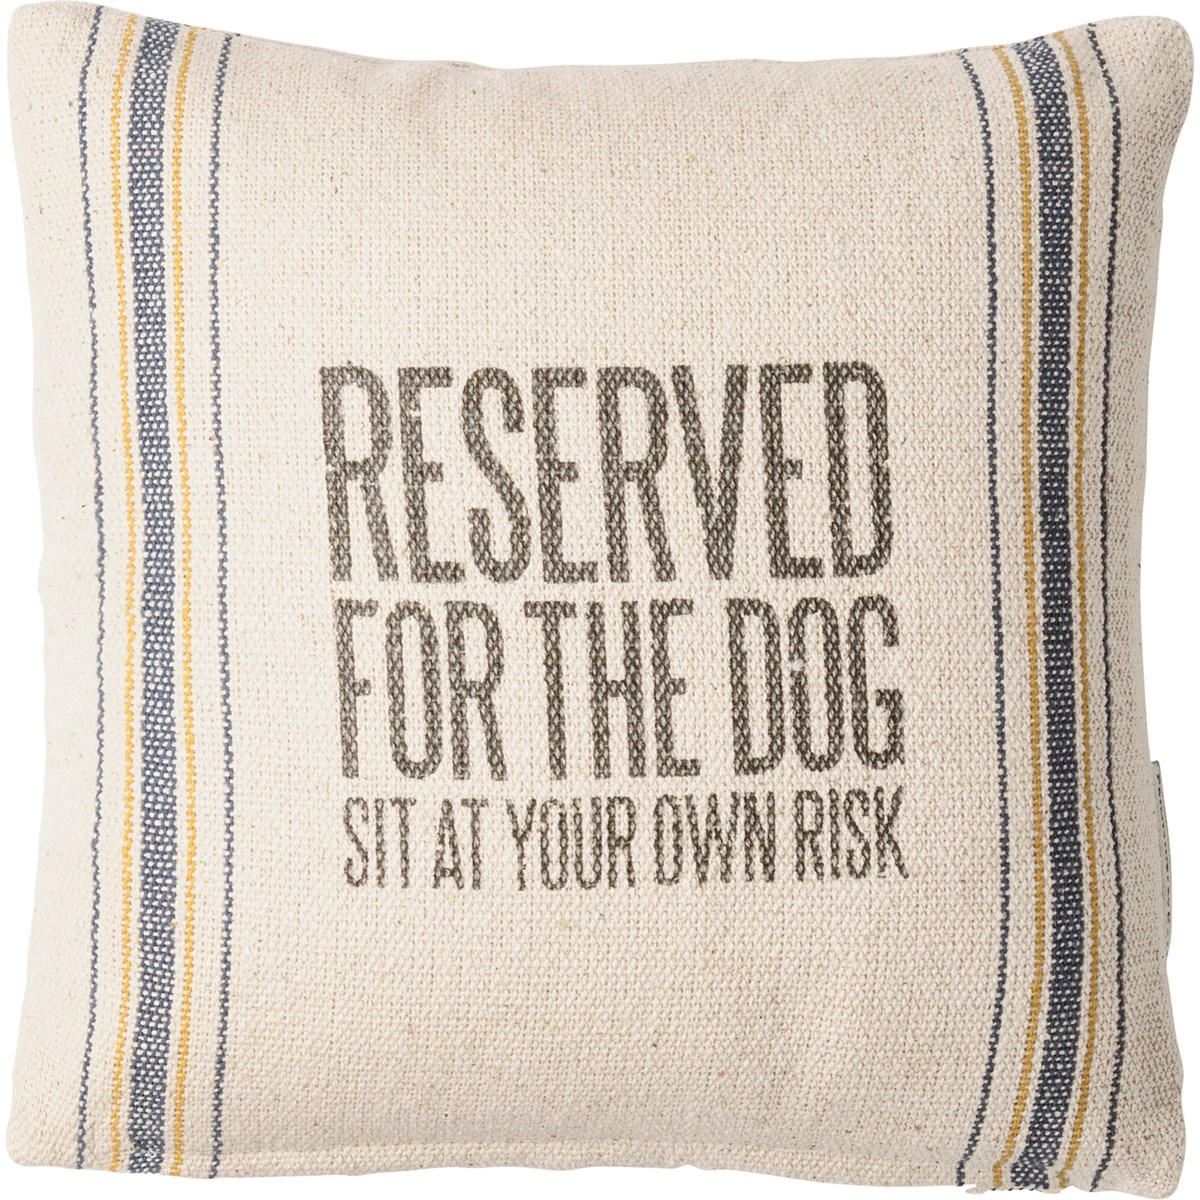 Reserved For The Dog Pillow - Cotton, Zipper